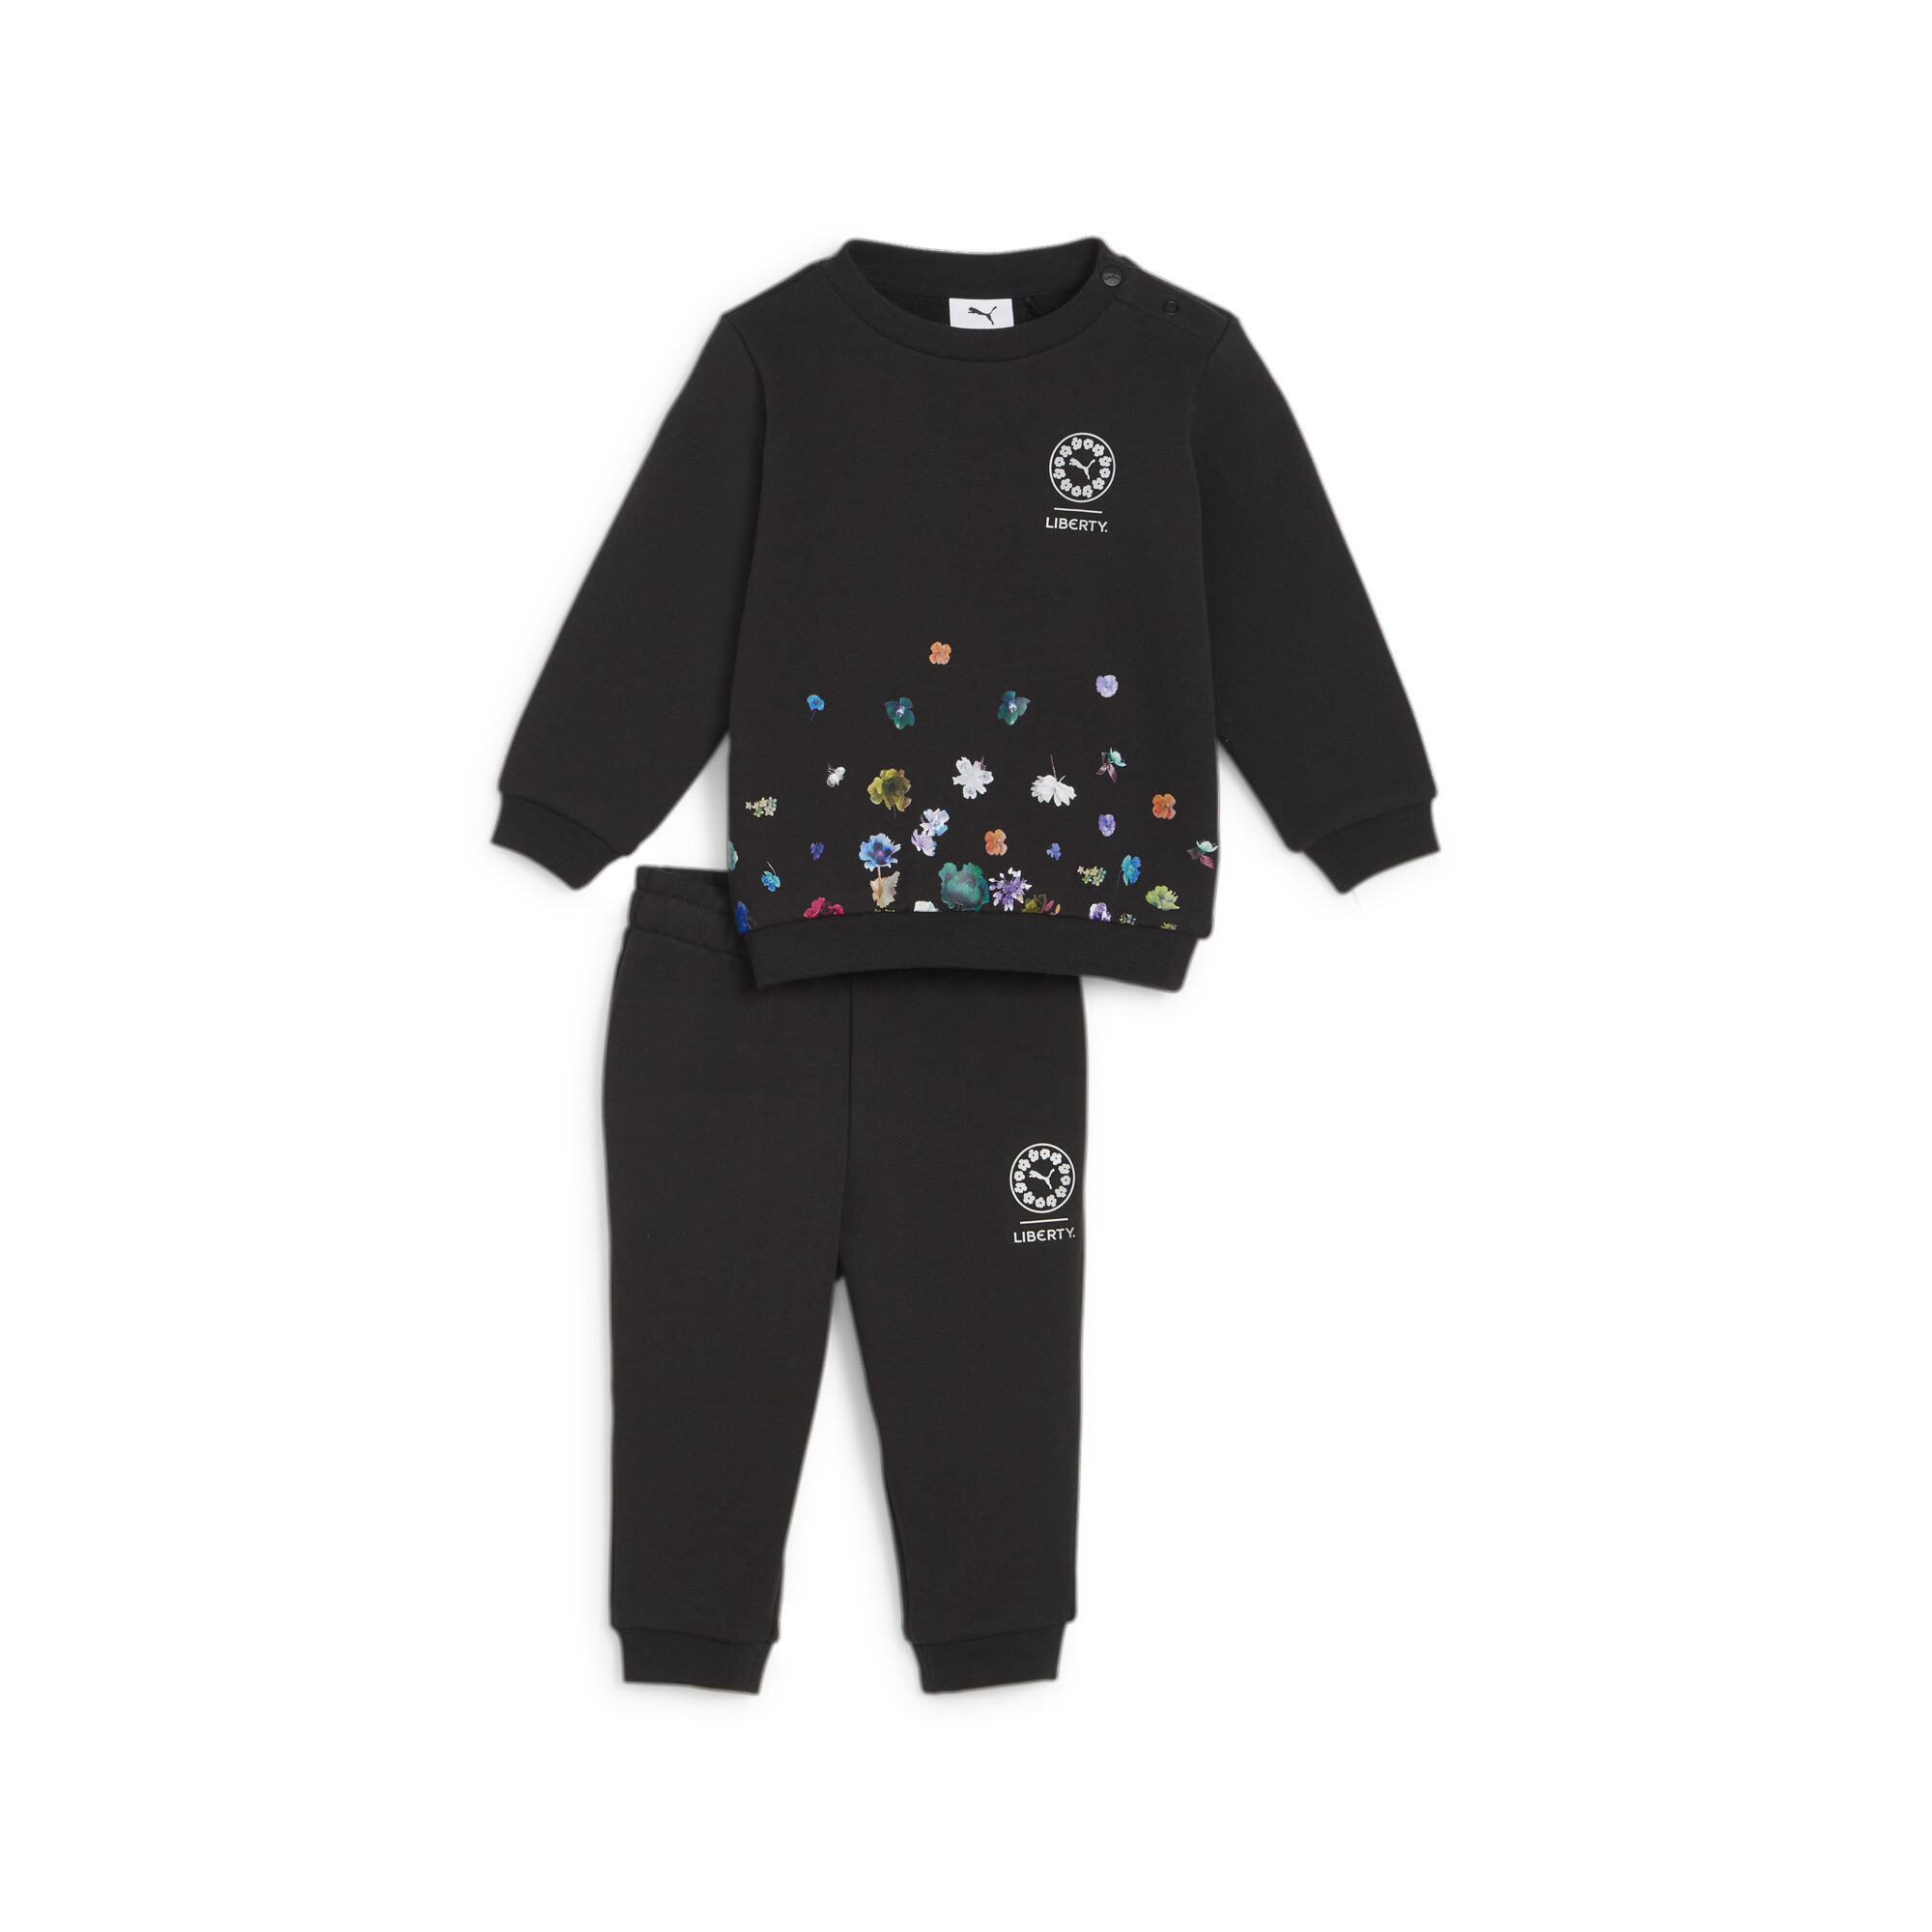 PUMA X LIBERTY Toddlers' Jogger Set In Black, Size 1-2 Youth